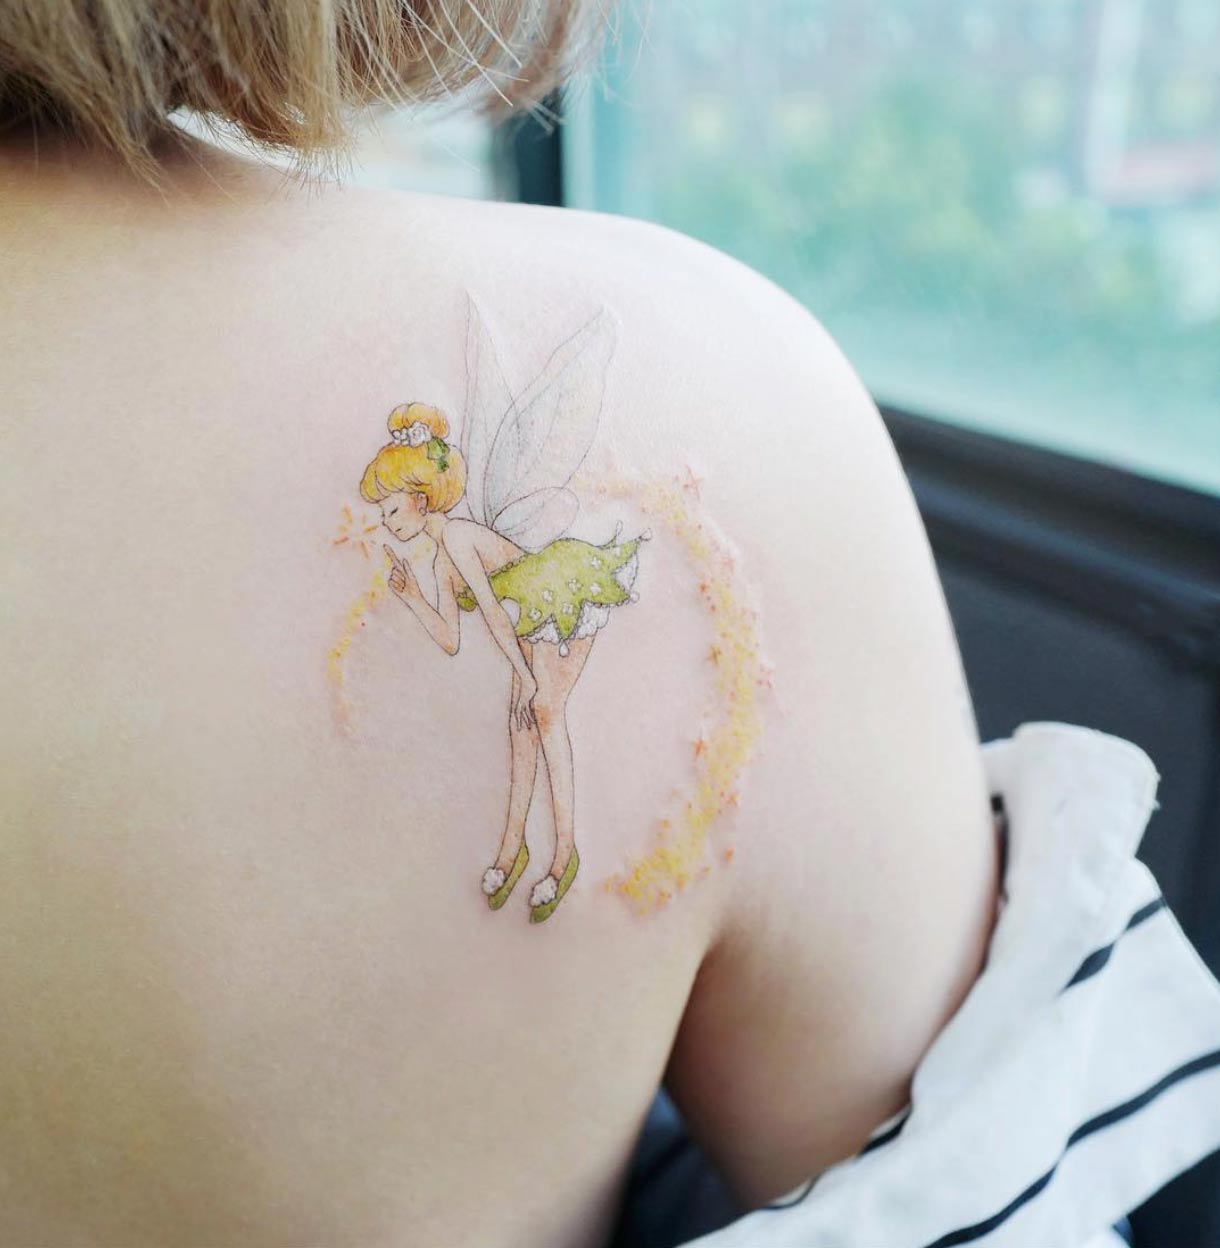 Tinker Bell by Banul